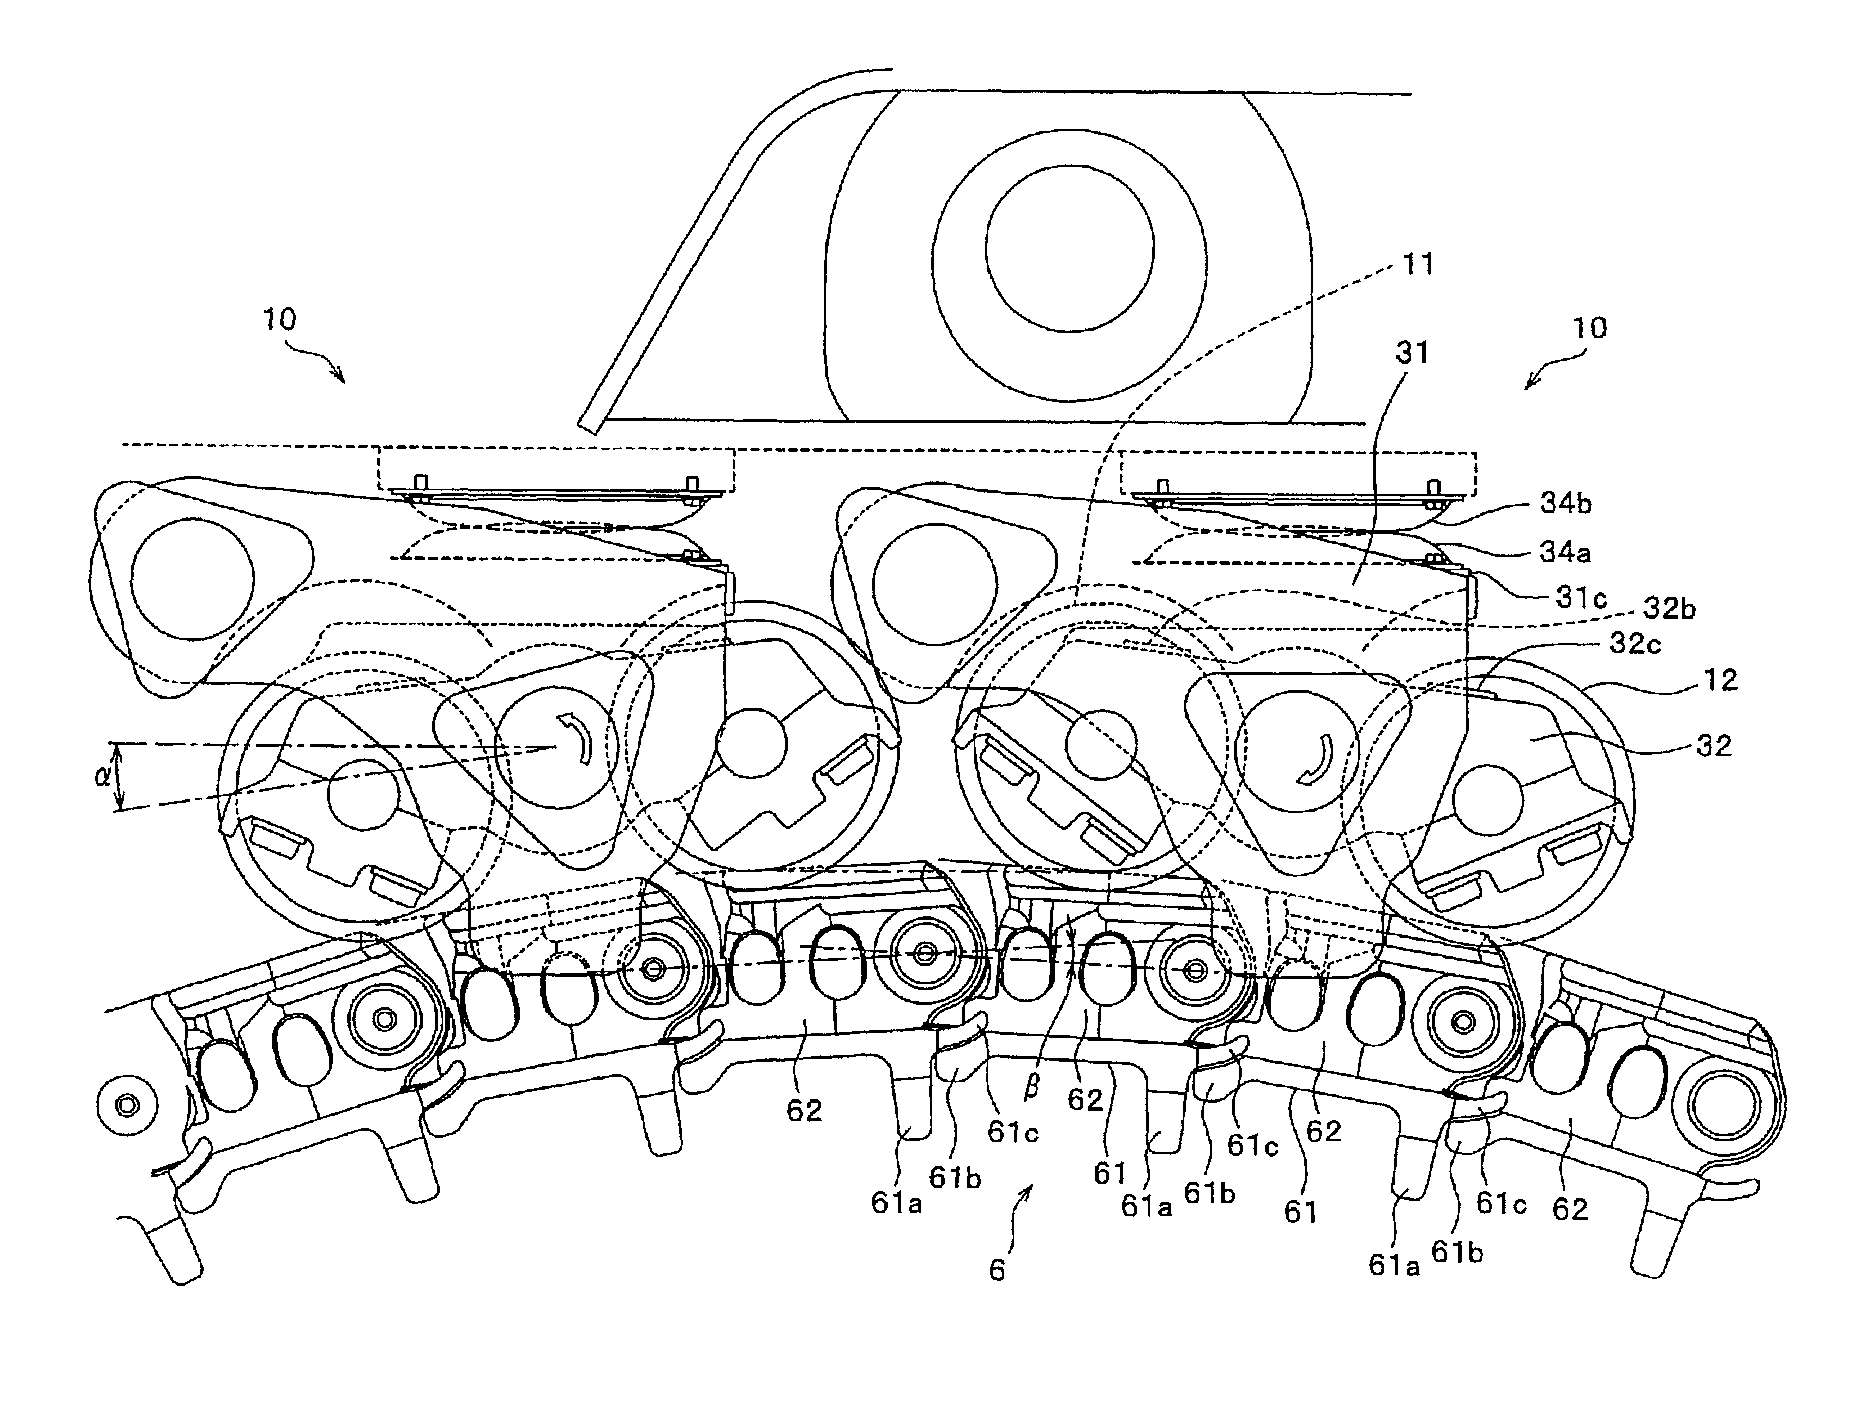 Running device for track-laying vehicle